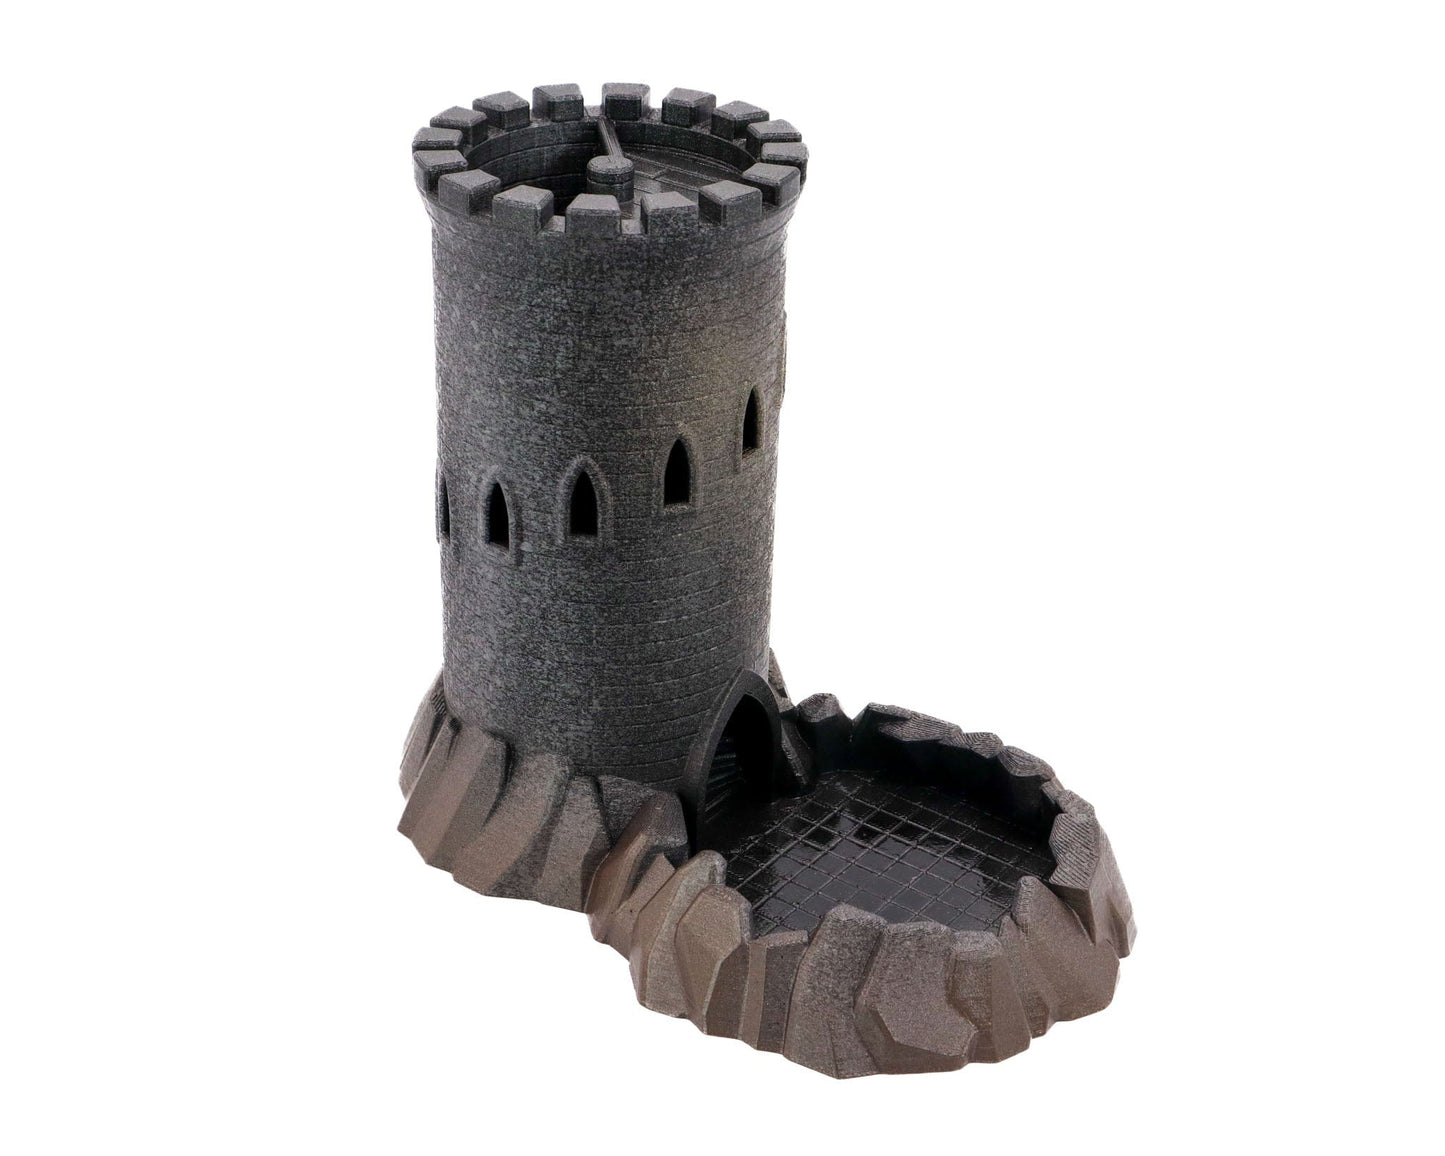 LightAndTimeArt Dice Tower Large Medieval Castle Dice Tower - 3D Board Game Accessory - Dungeons & Dragons and Dice Games